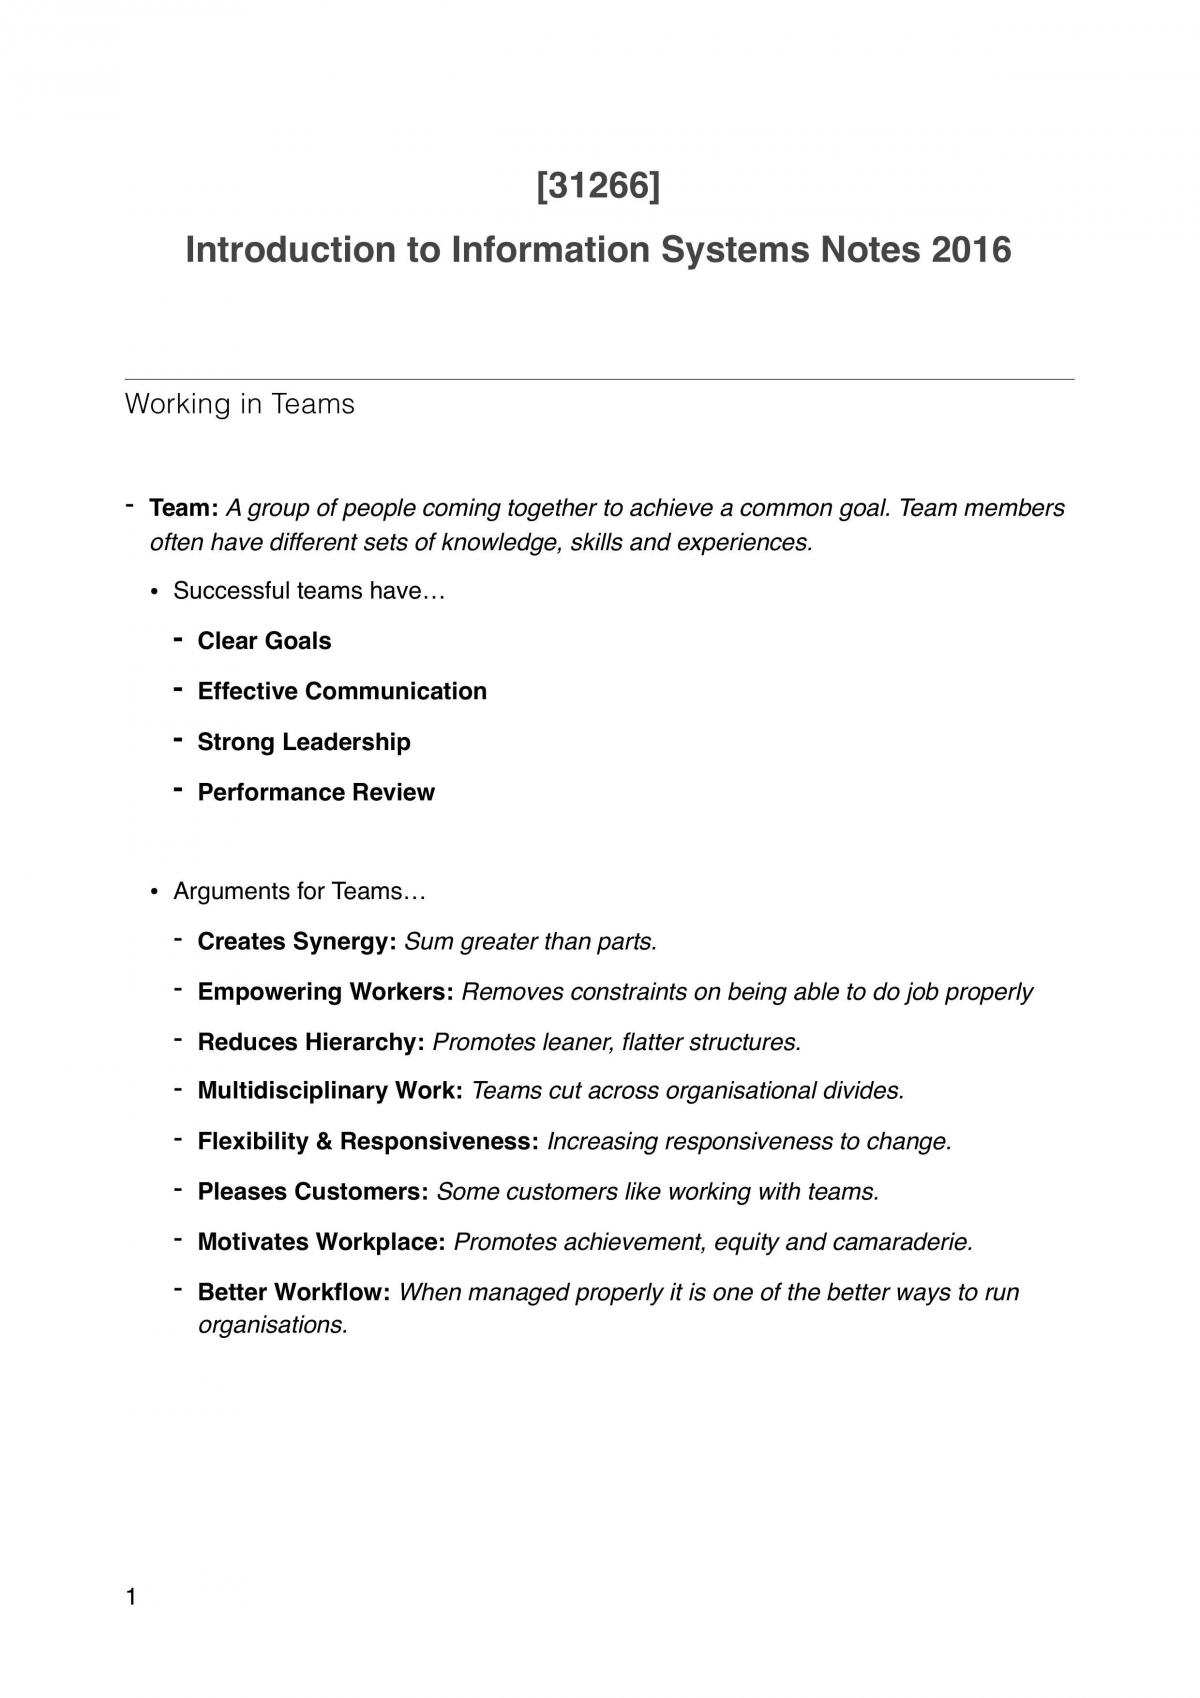 Notes for all Information Systems Lectures and Readings - Page 1